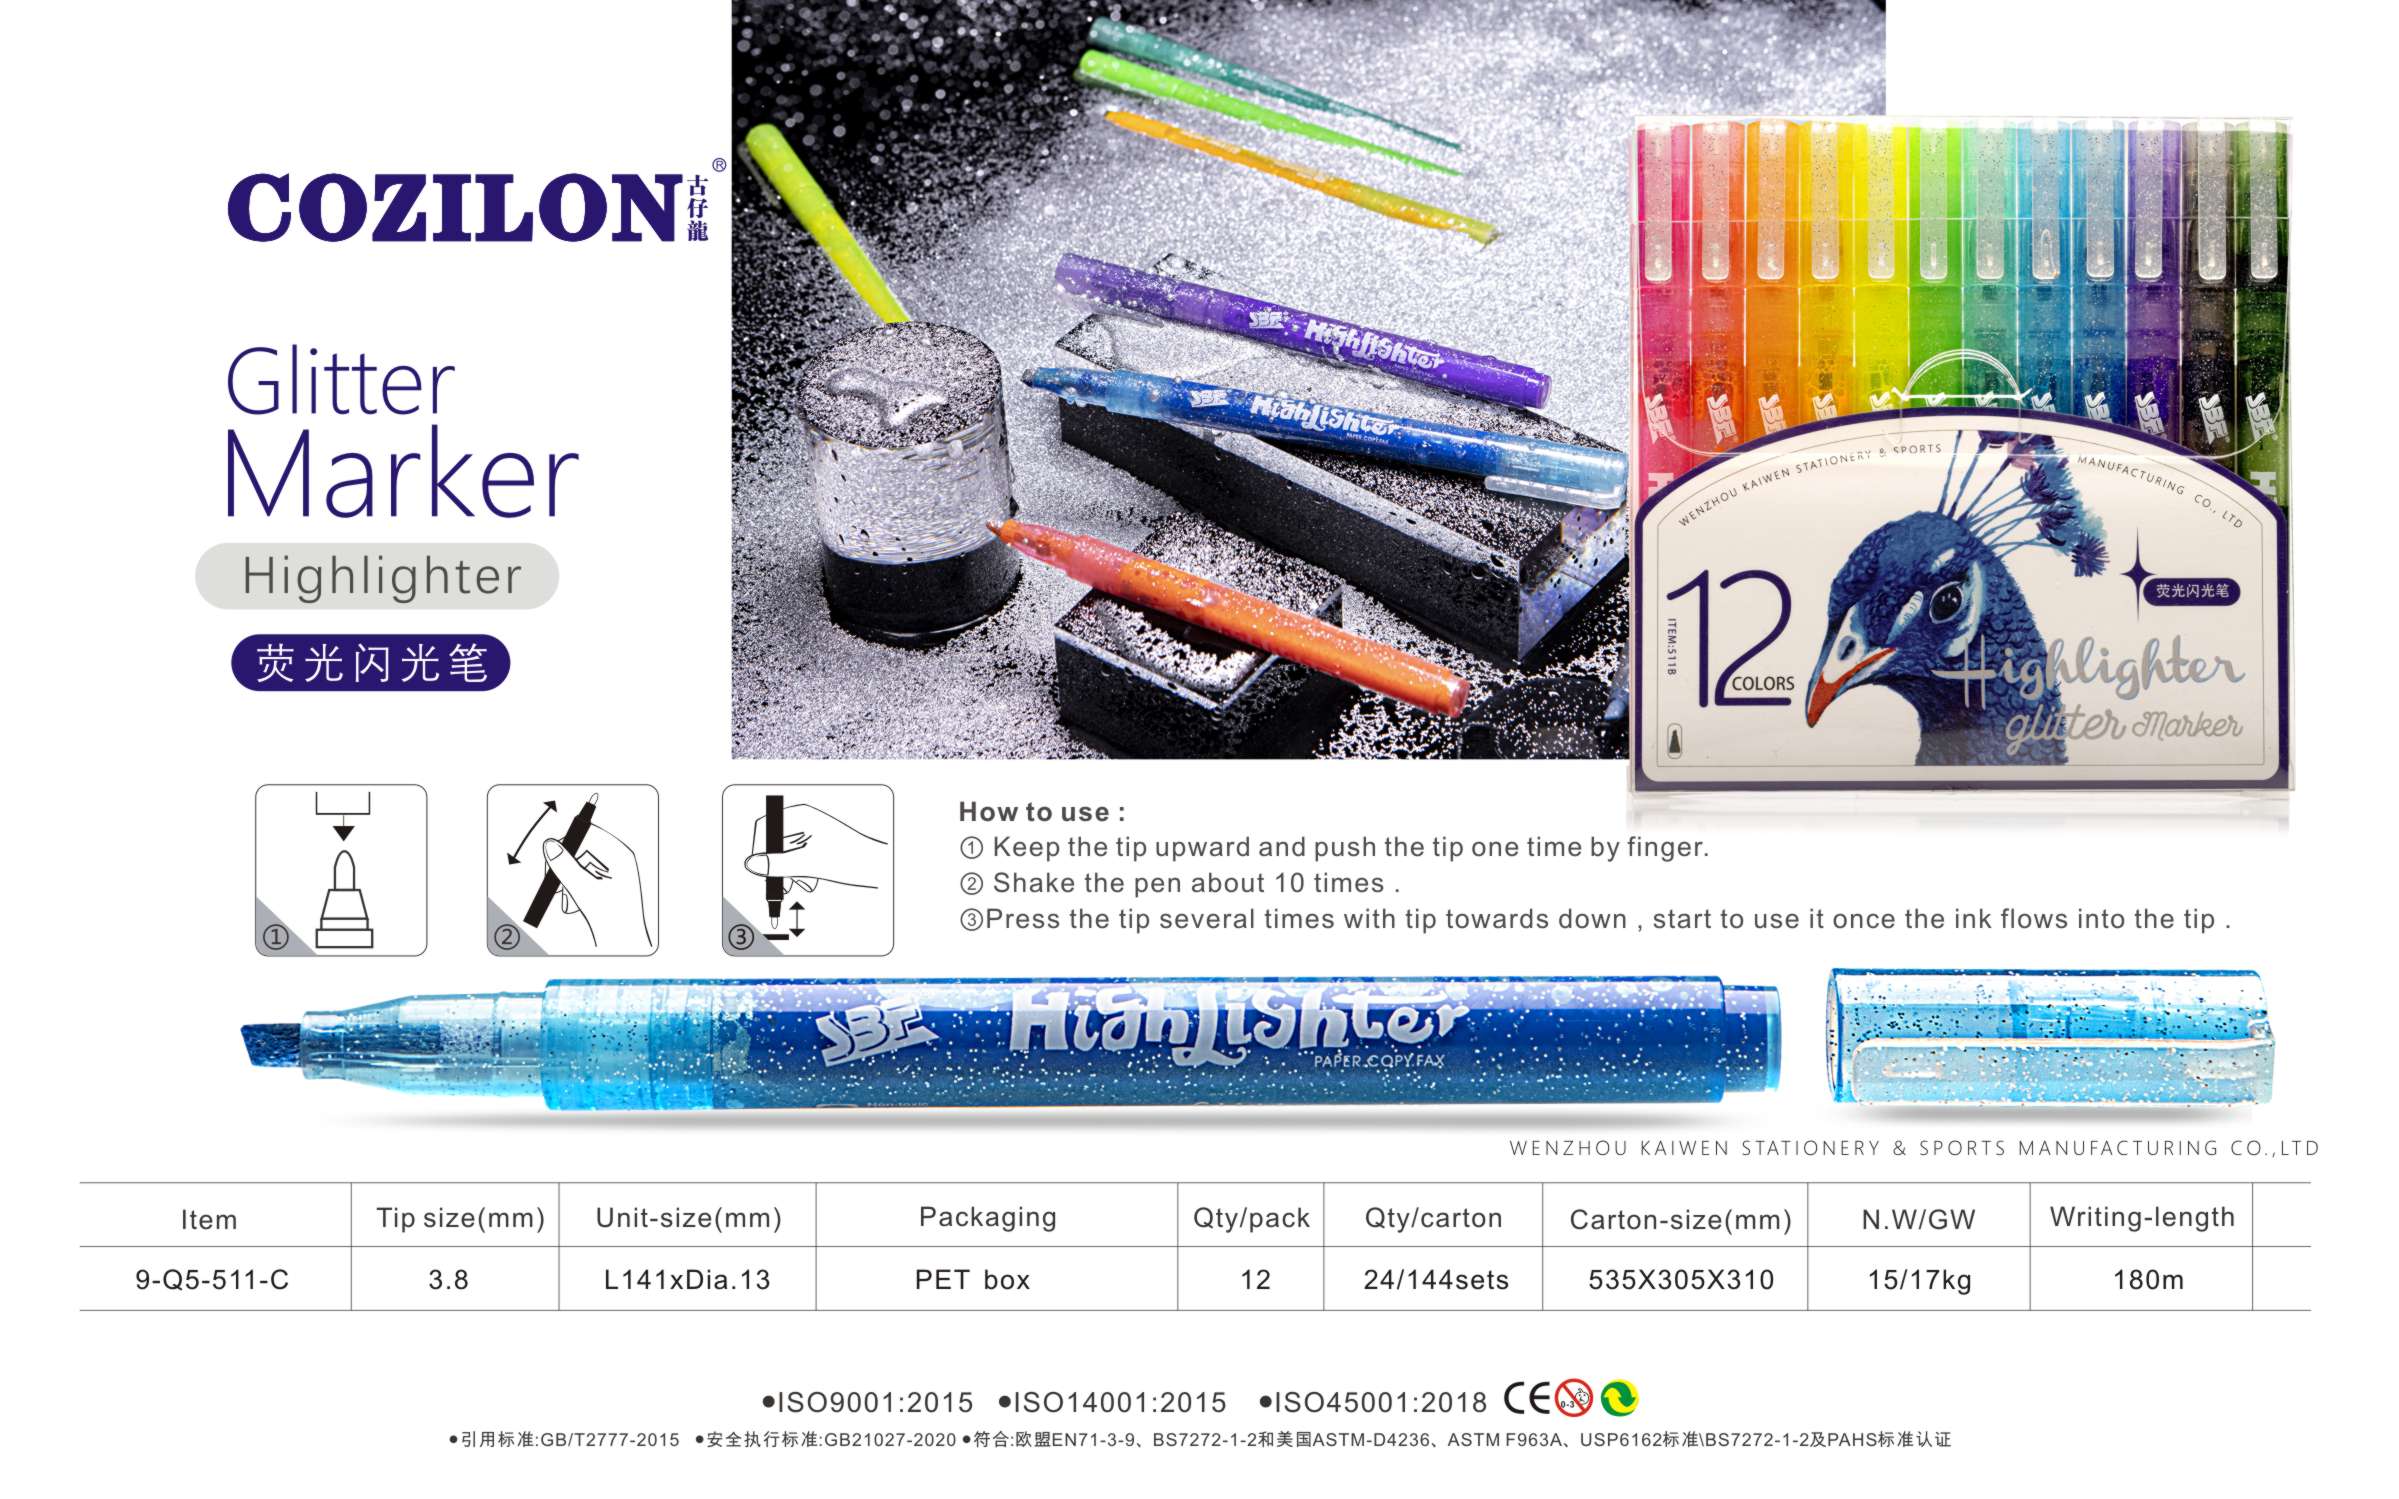 Best Glitter Gel Pens for Creative Writing and Art Projects - Far